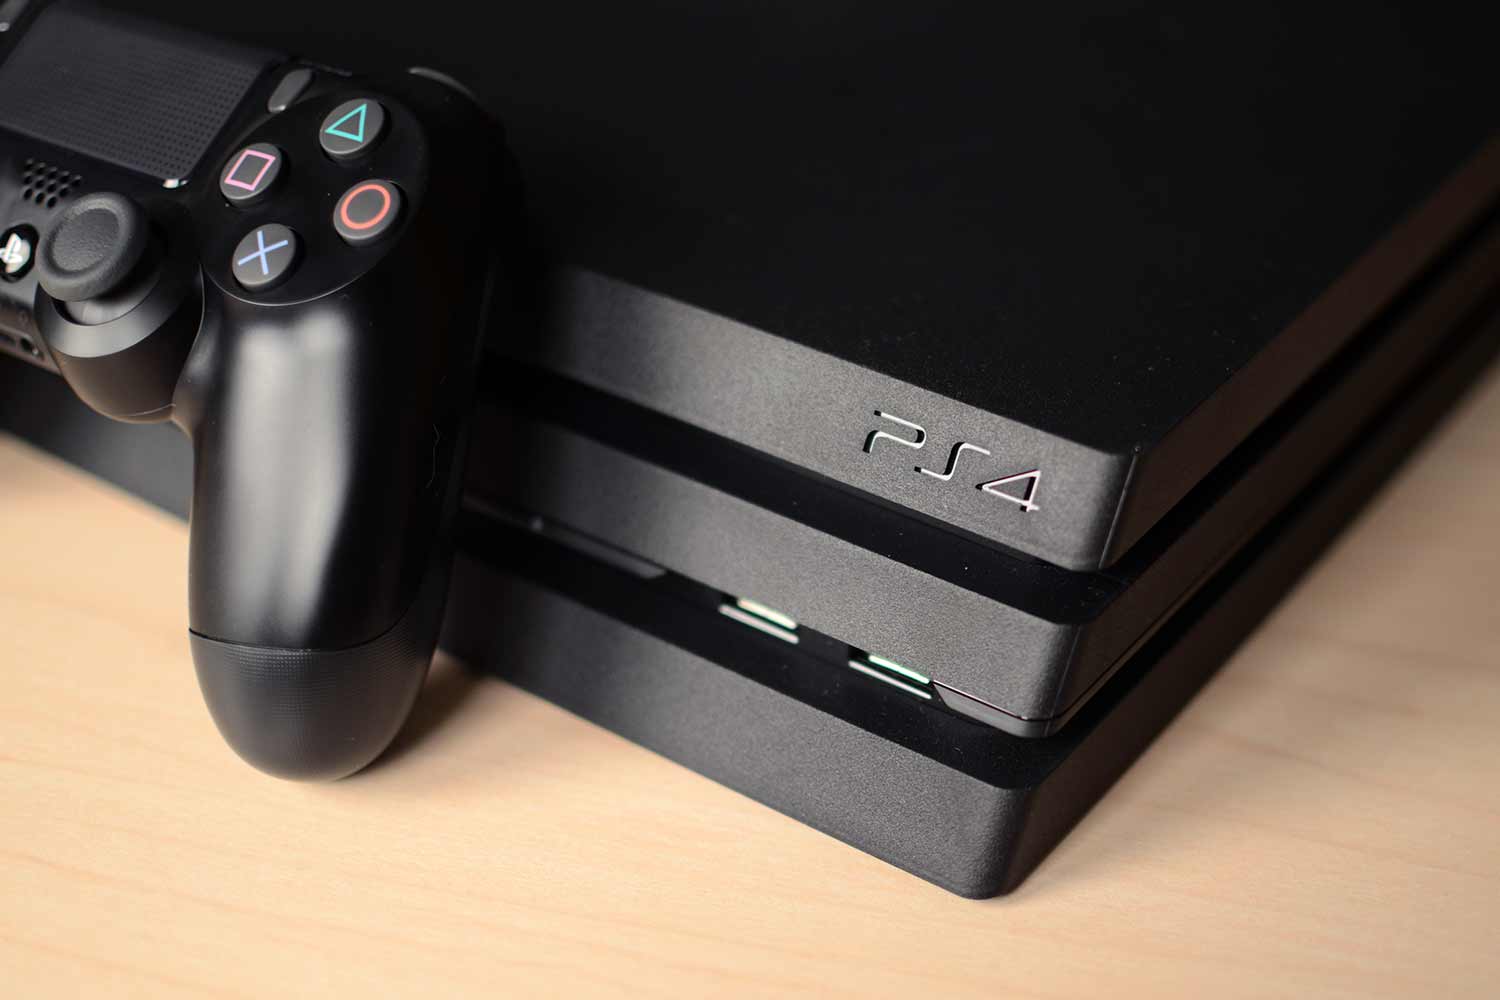 Sony PlayStation 4 Pro Review 4K at Price | Digital Trends